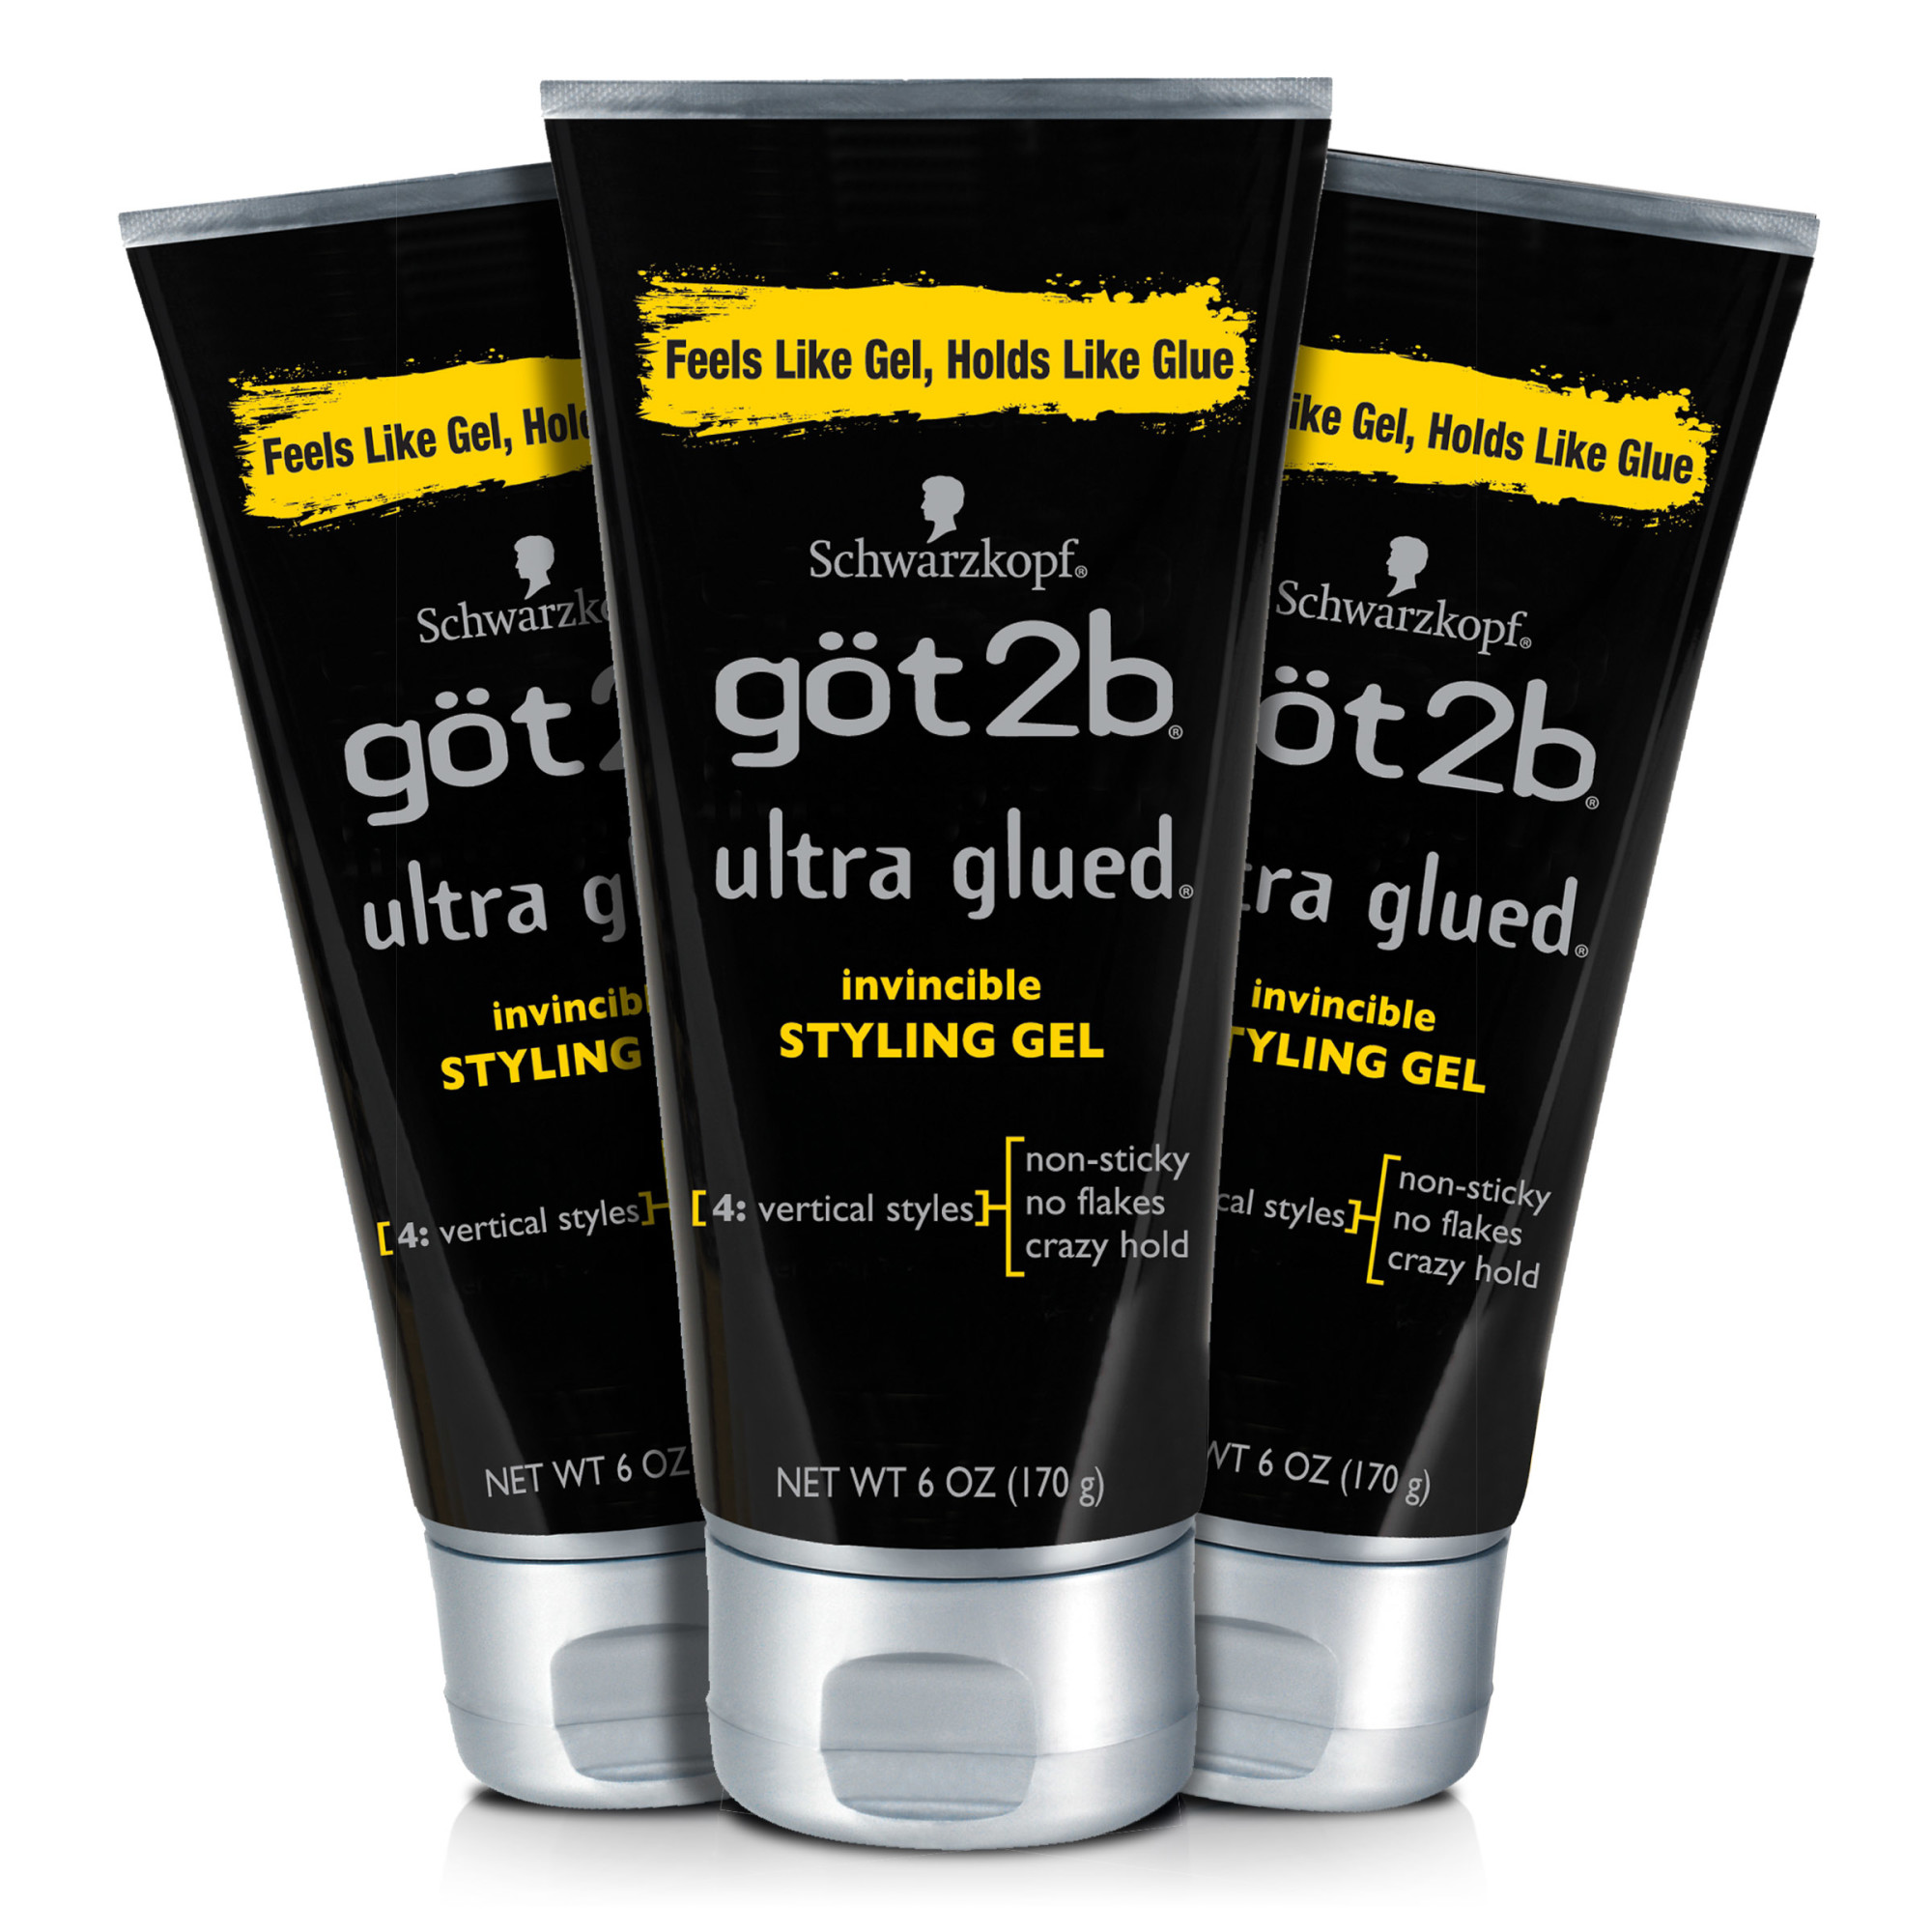 Got2b Ultra Glued Invincible Styling Hair Gel, 6 oz (Count of 3) - image 2 of 9